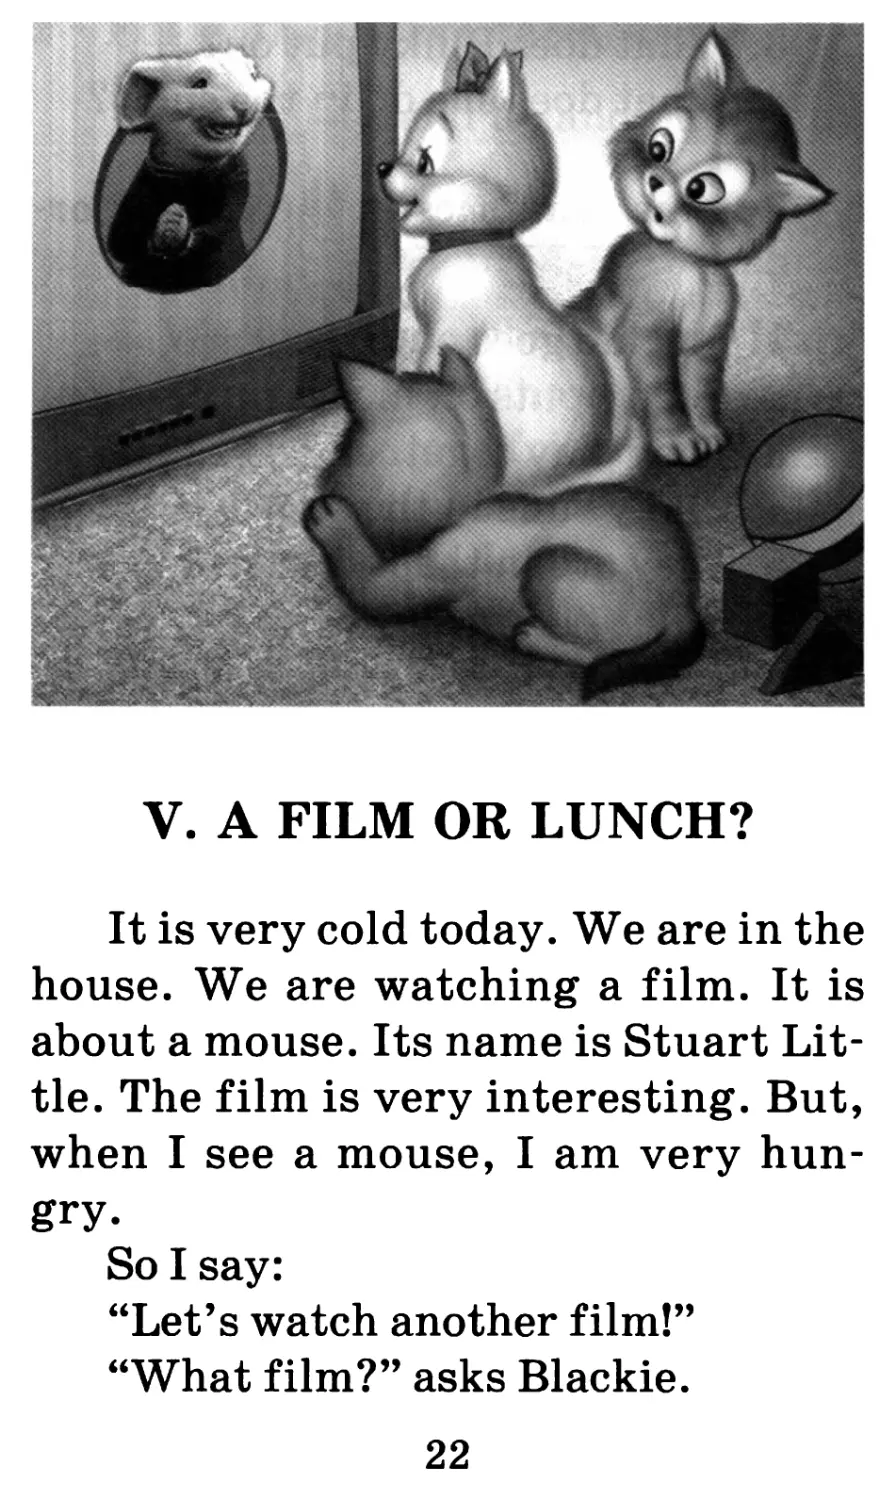 V. A Film or Lunch?